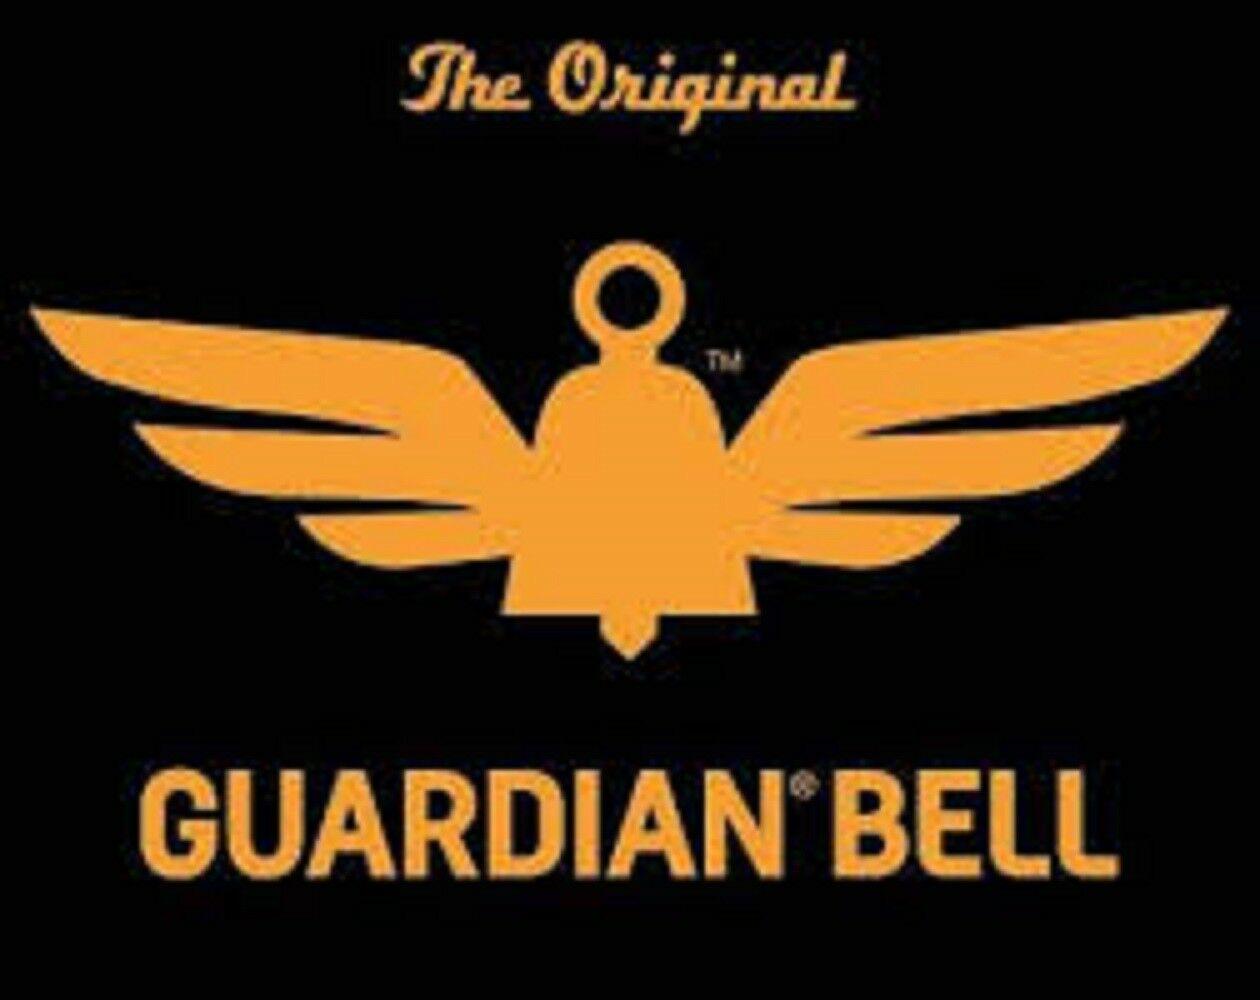 PRAYING HANDS Guardian® Bell Motorcycle - FITS Harley Accessory HD Gremlin NEW - Moto Life Products